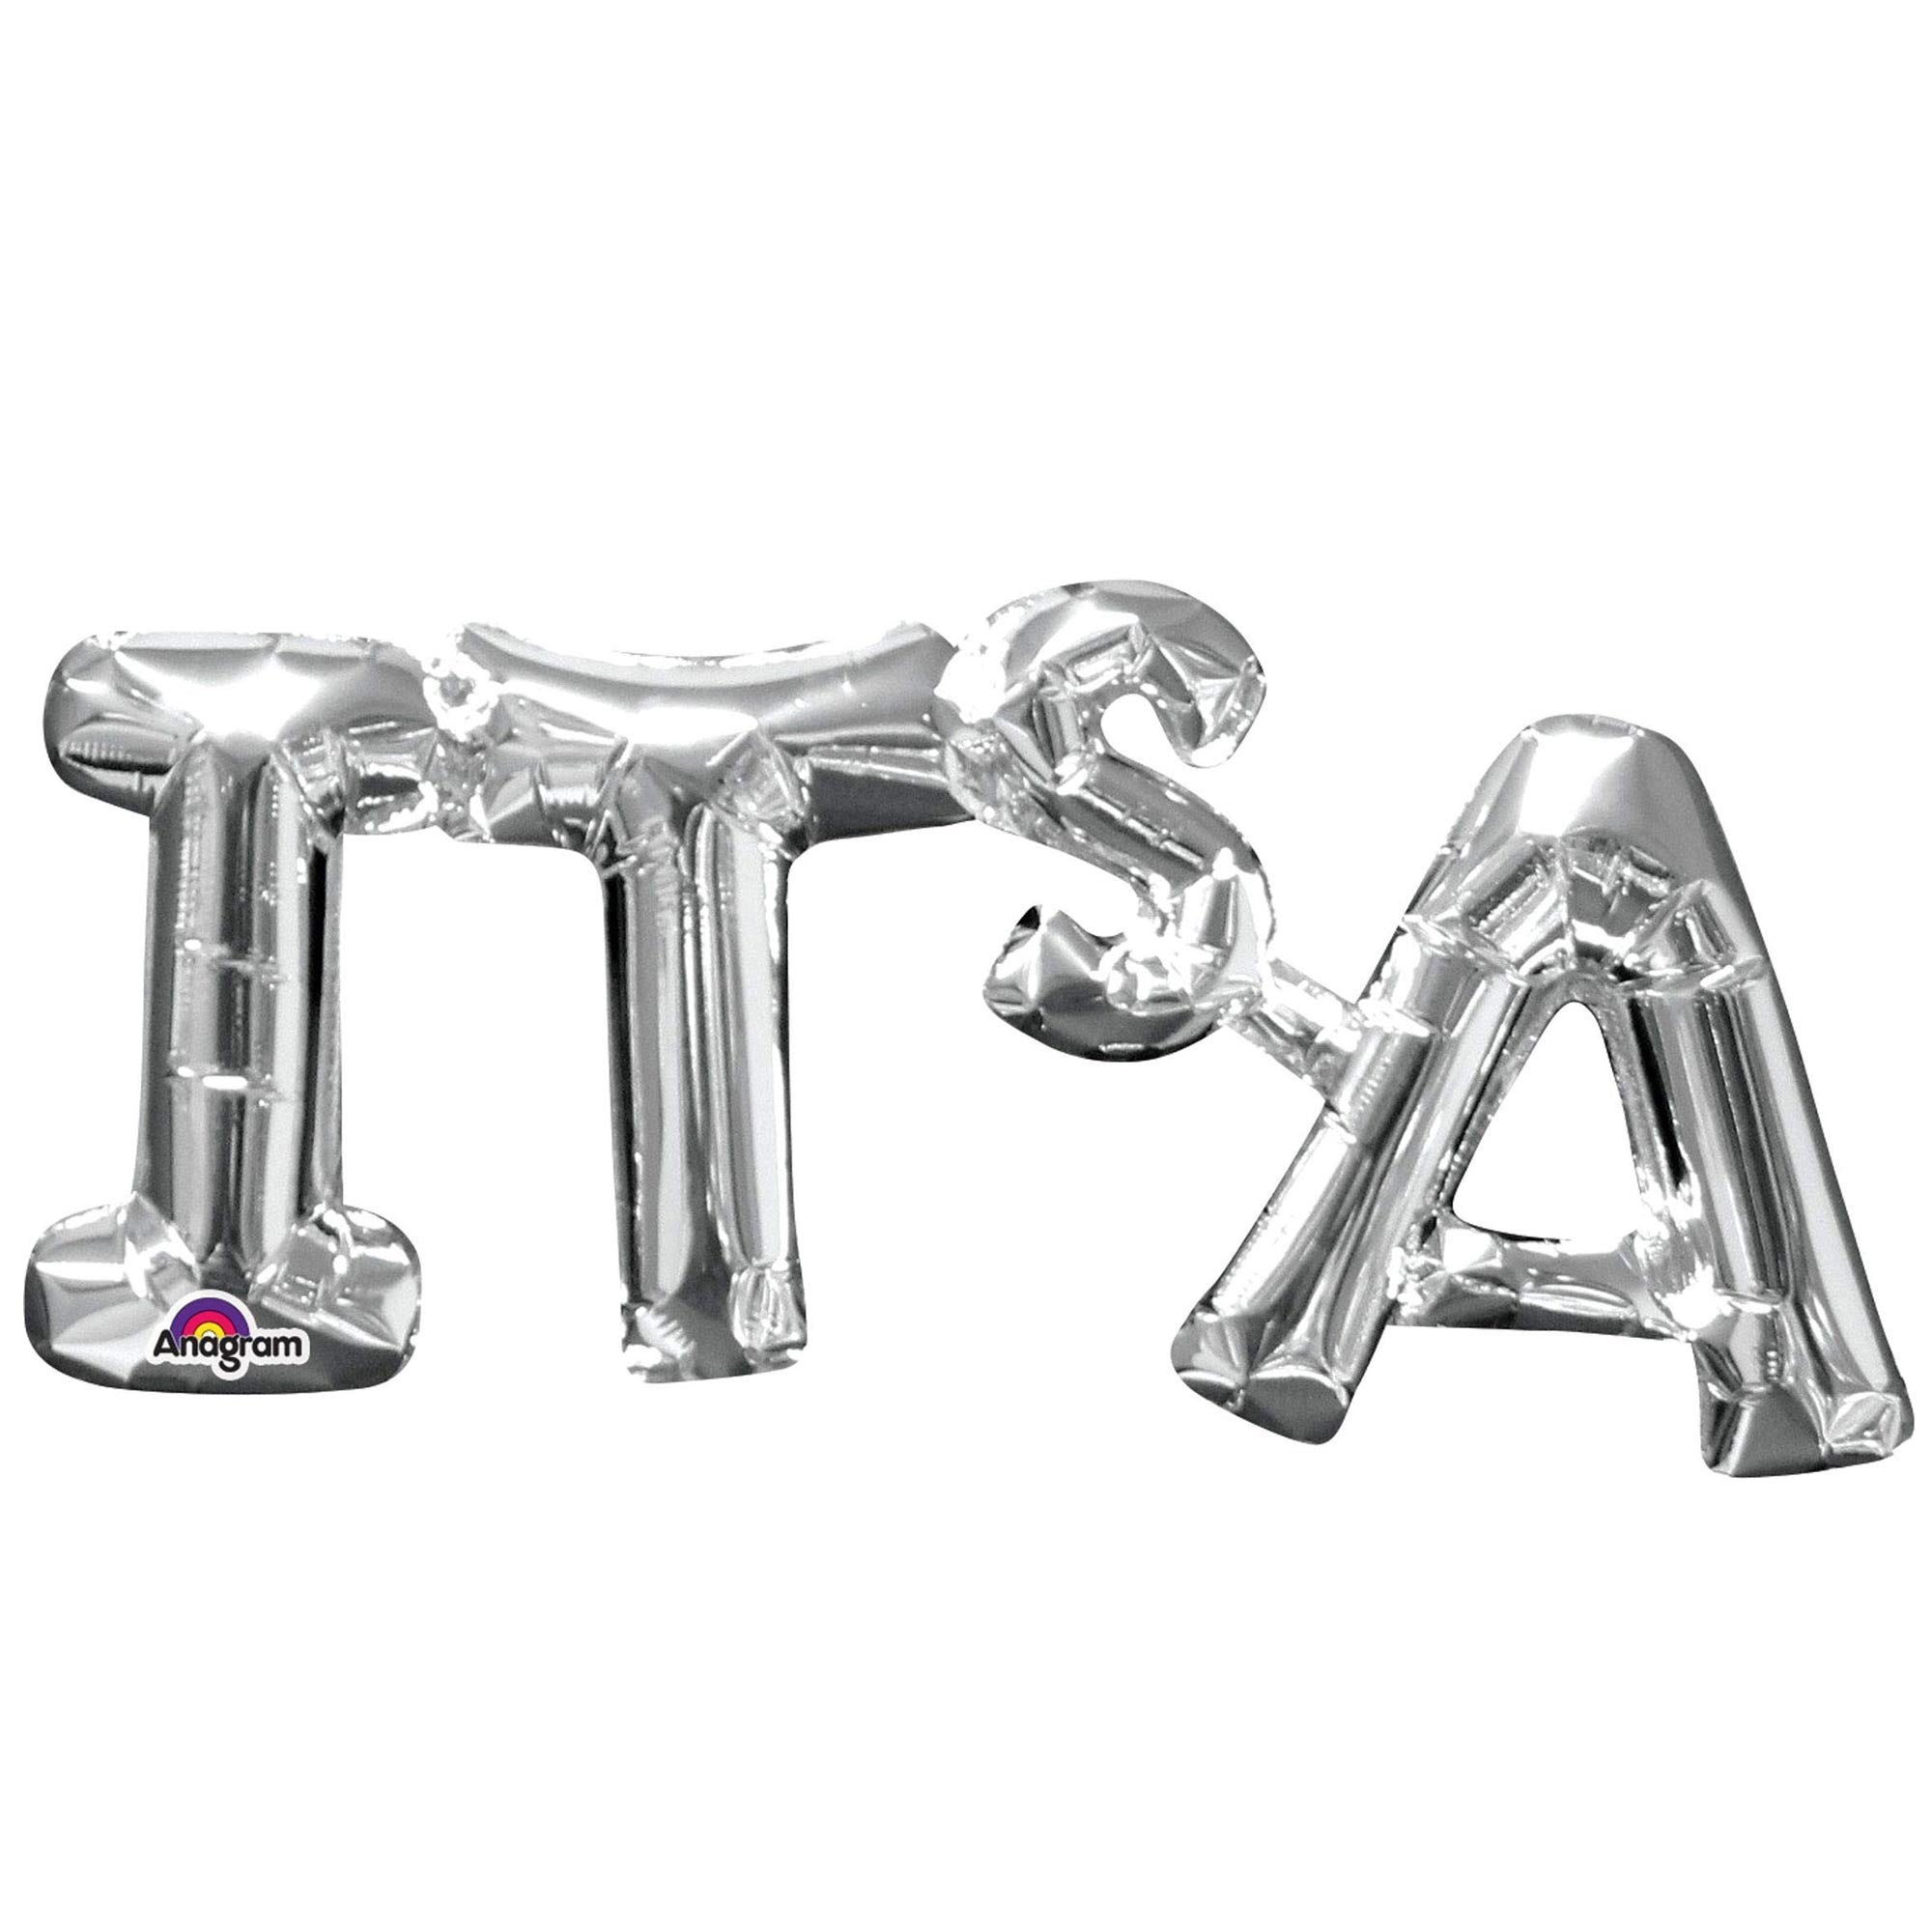 Its A Silver Phrase Air Filled Foil Balloon - Party Centre